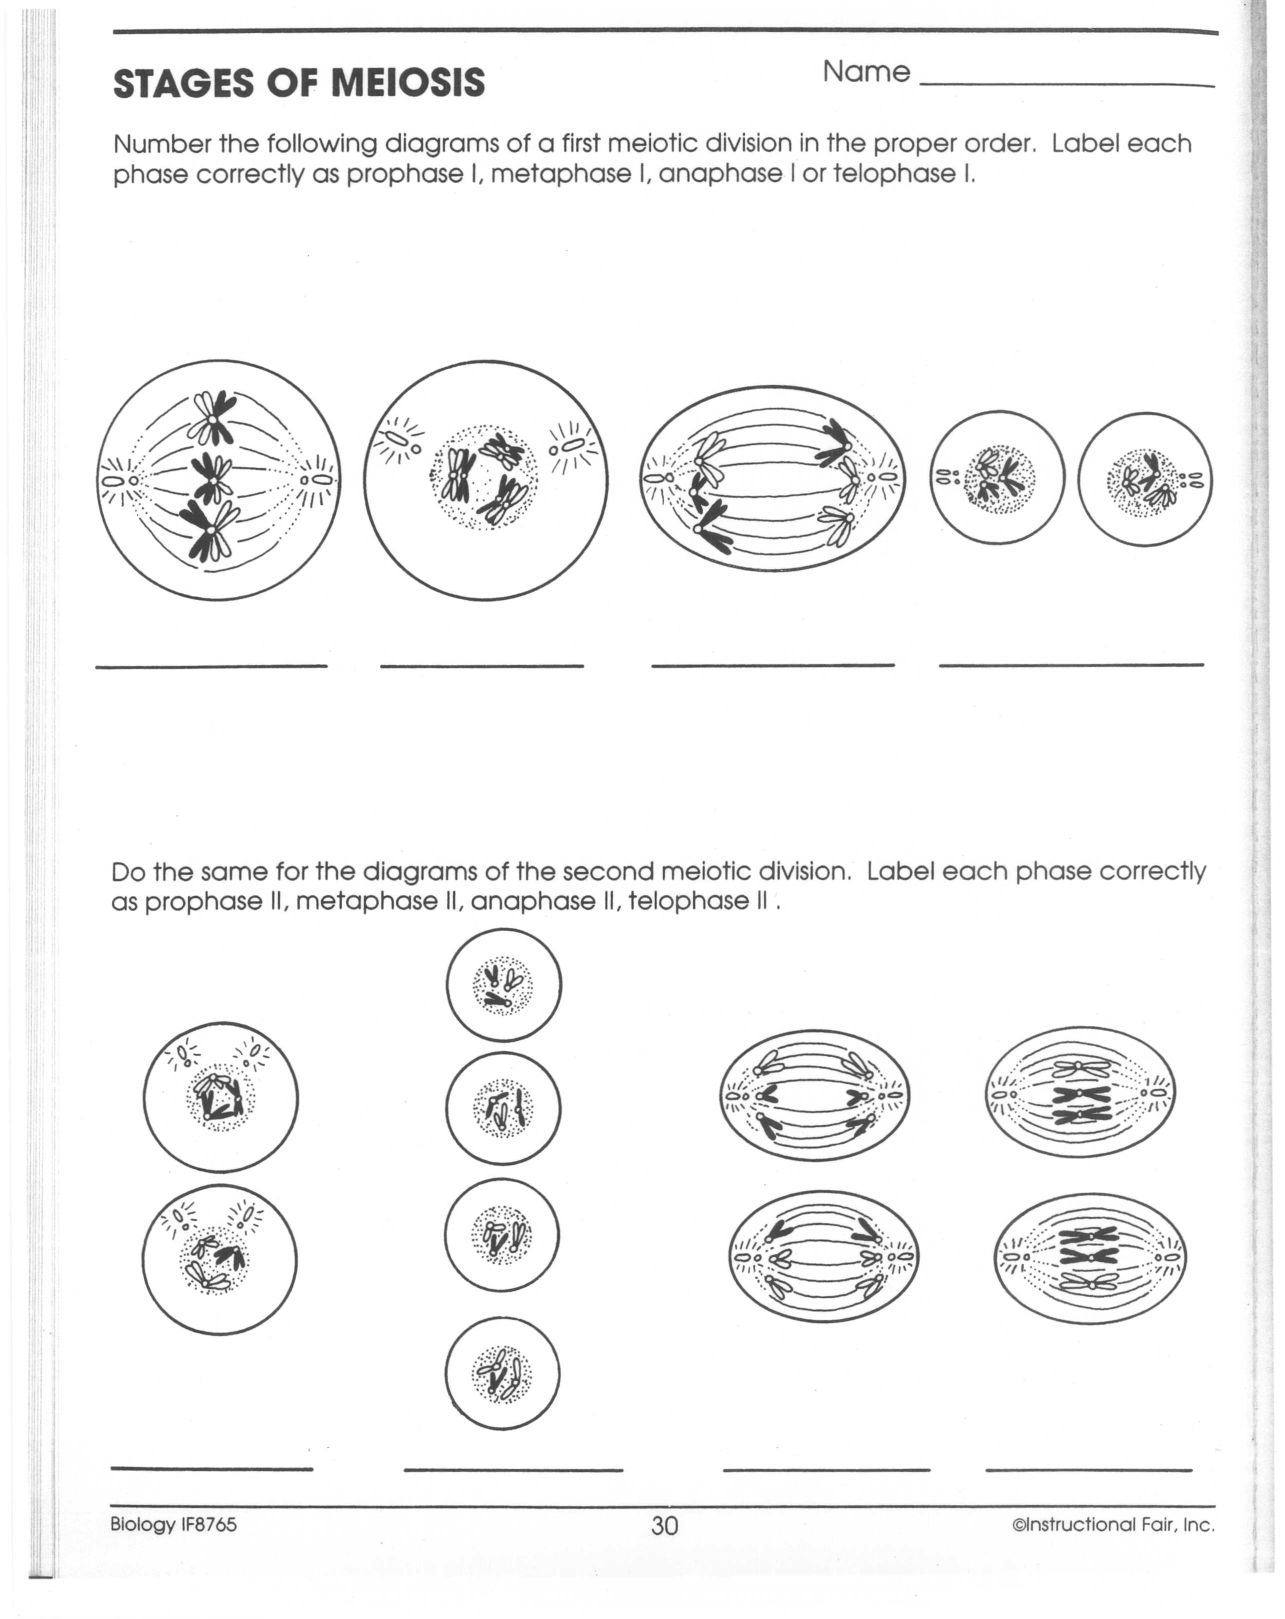 15 Best Images Of Phases Of Meiosis Worksheet Meiosis Stages